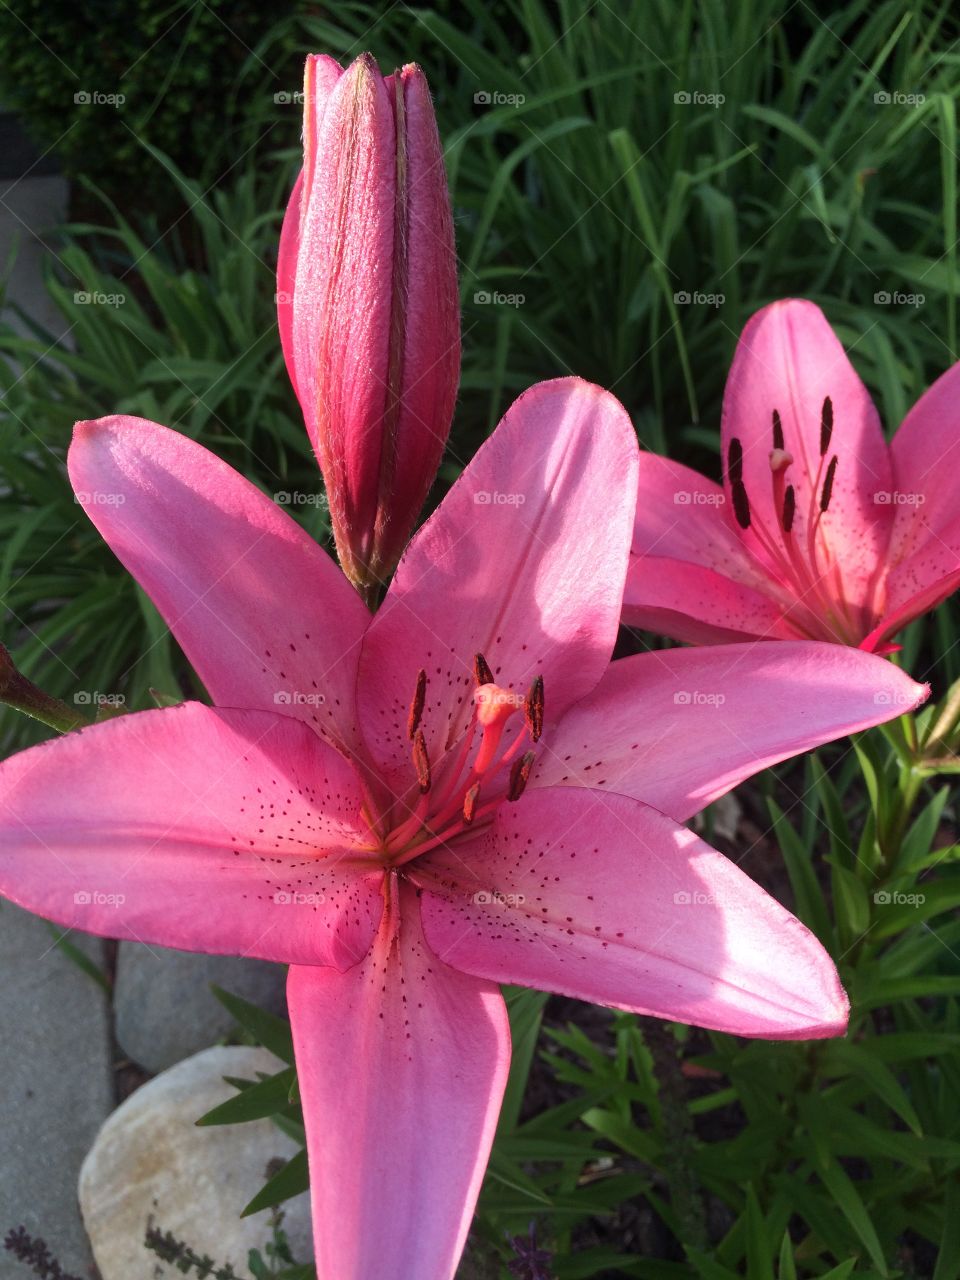 Magenta Lily. One of the many flowers my mother has planted in her yard.